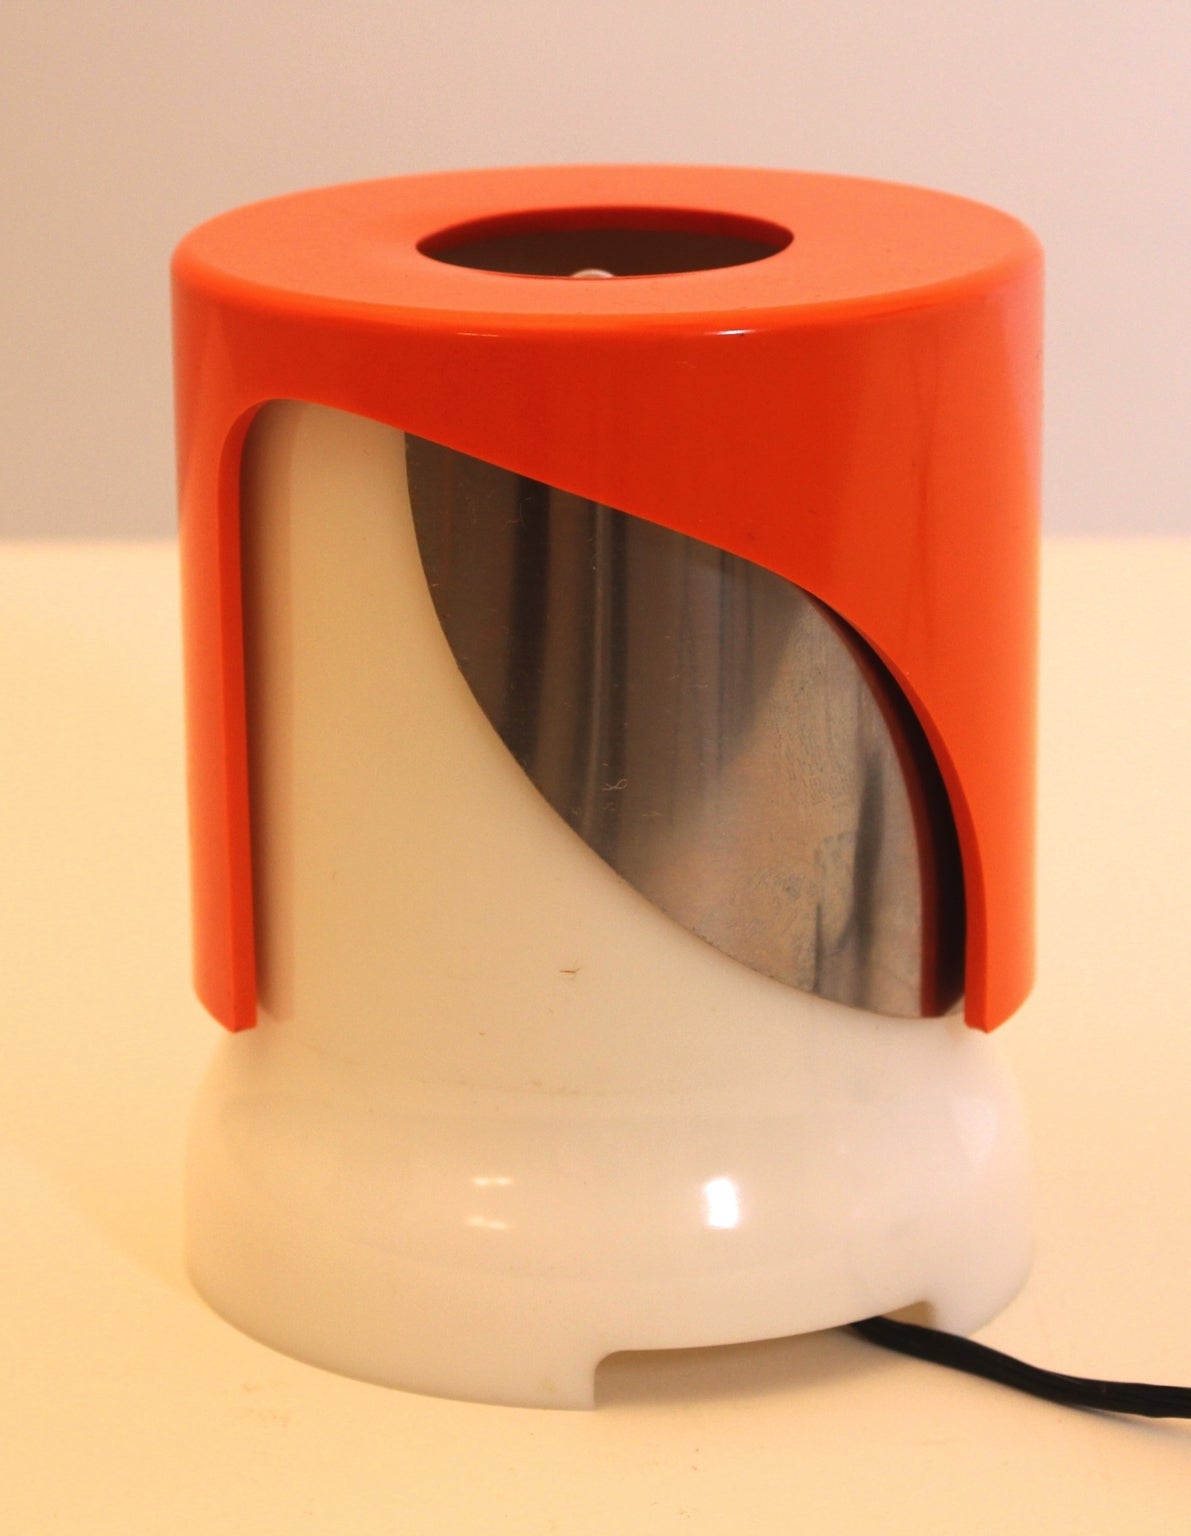 Space age authentic orange white table lamp model KD 24 by Joe Colombo circa 1966 and launched in 1968 for Kartell, Noviglio, Italy.
The time period for producing this model was from 1968 to 1973.
This authentic vintage table lamp from white and